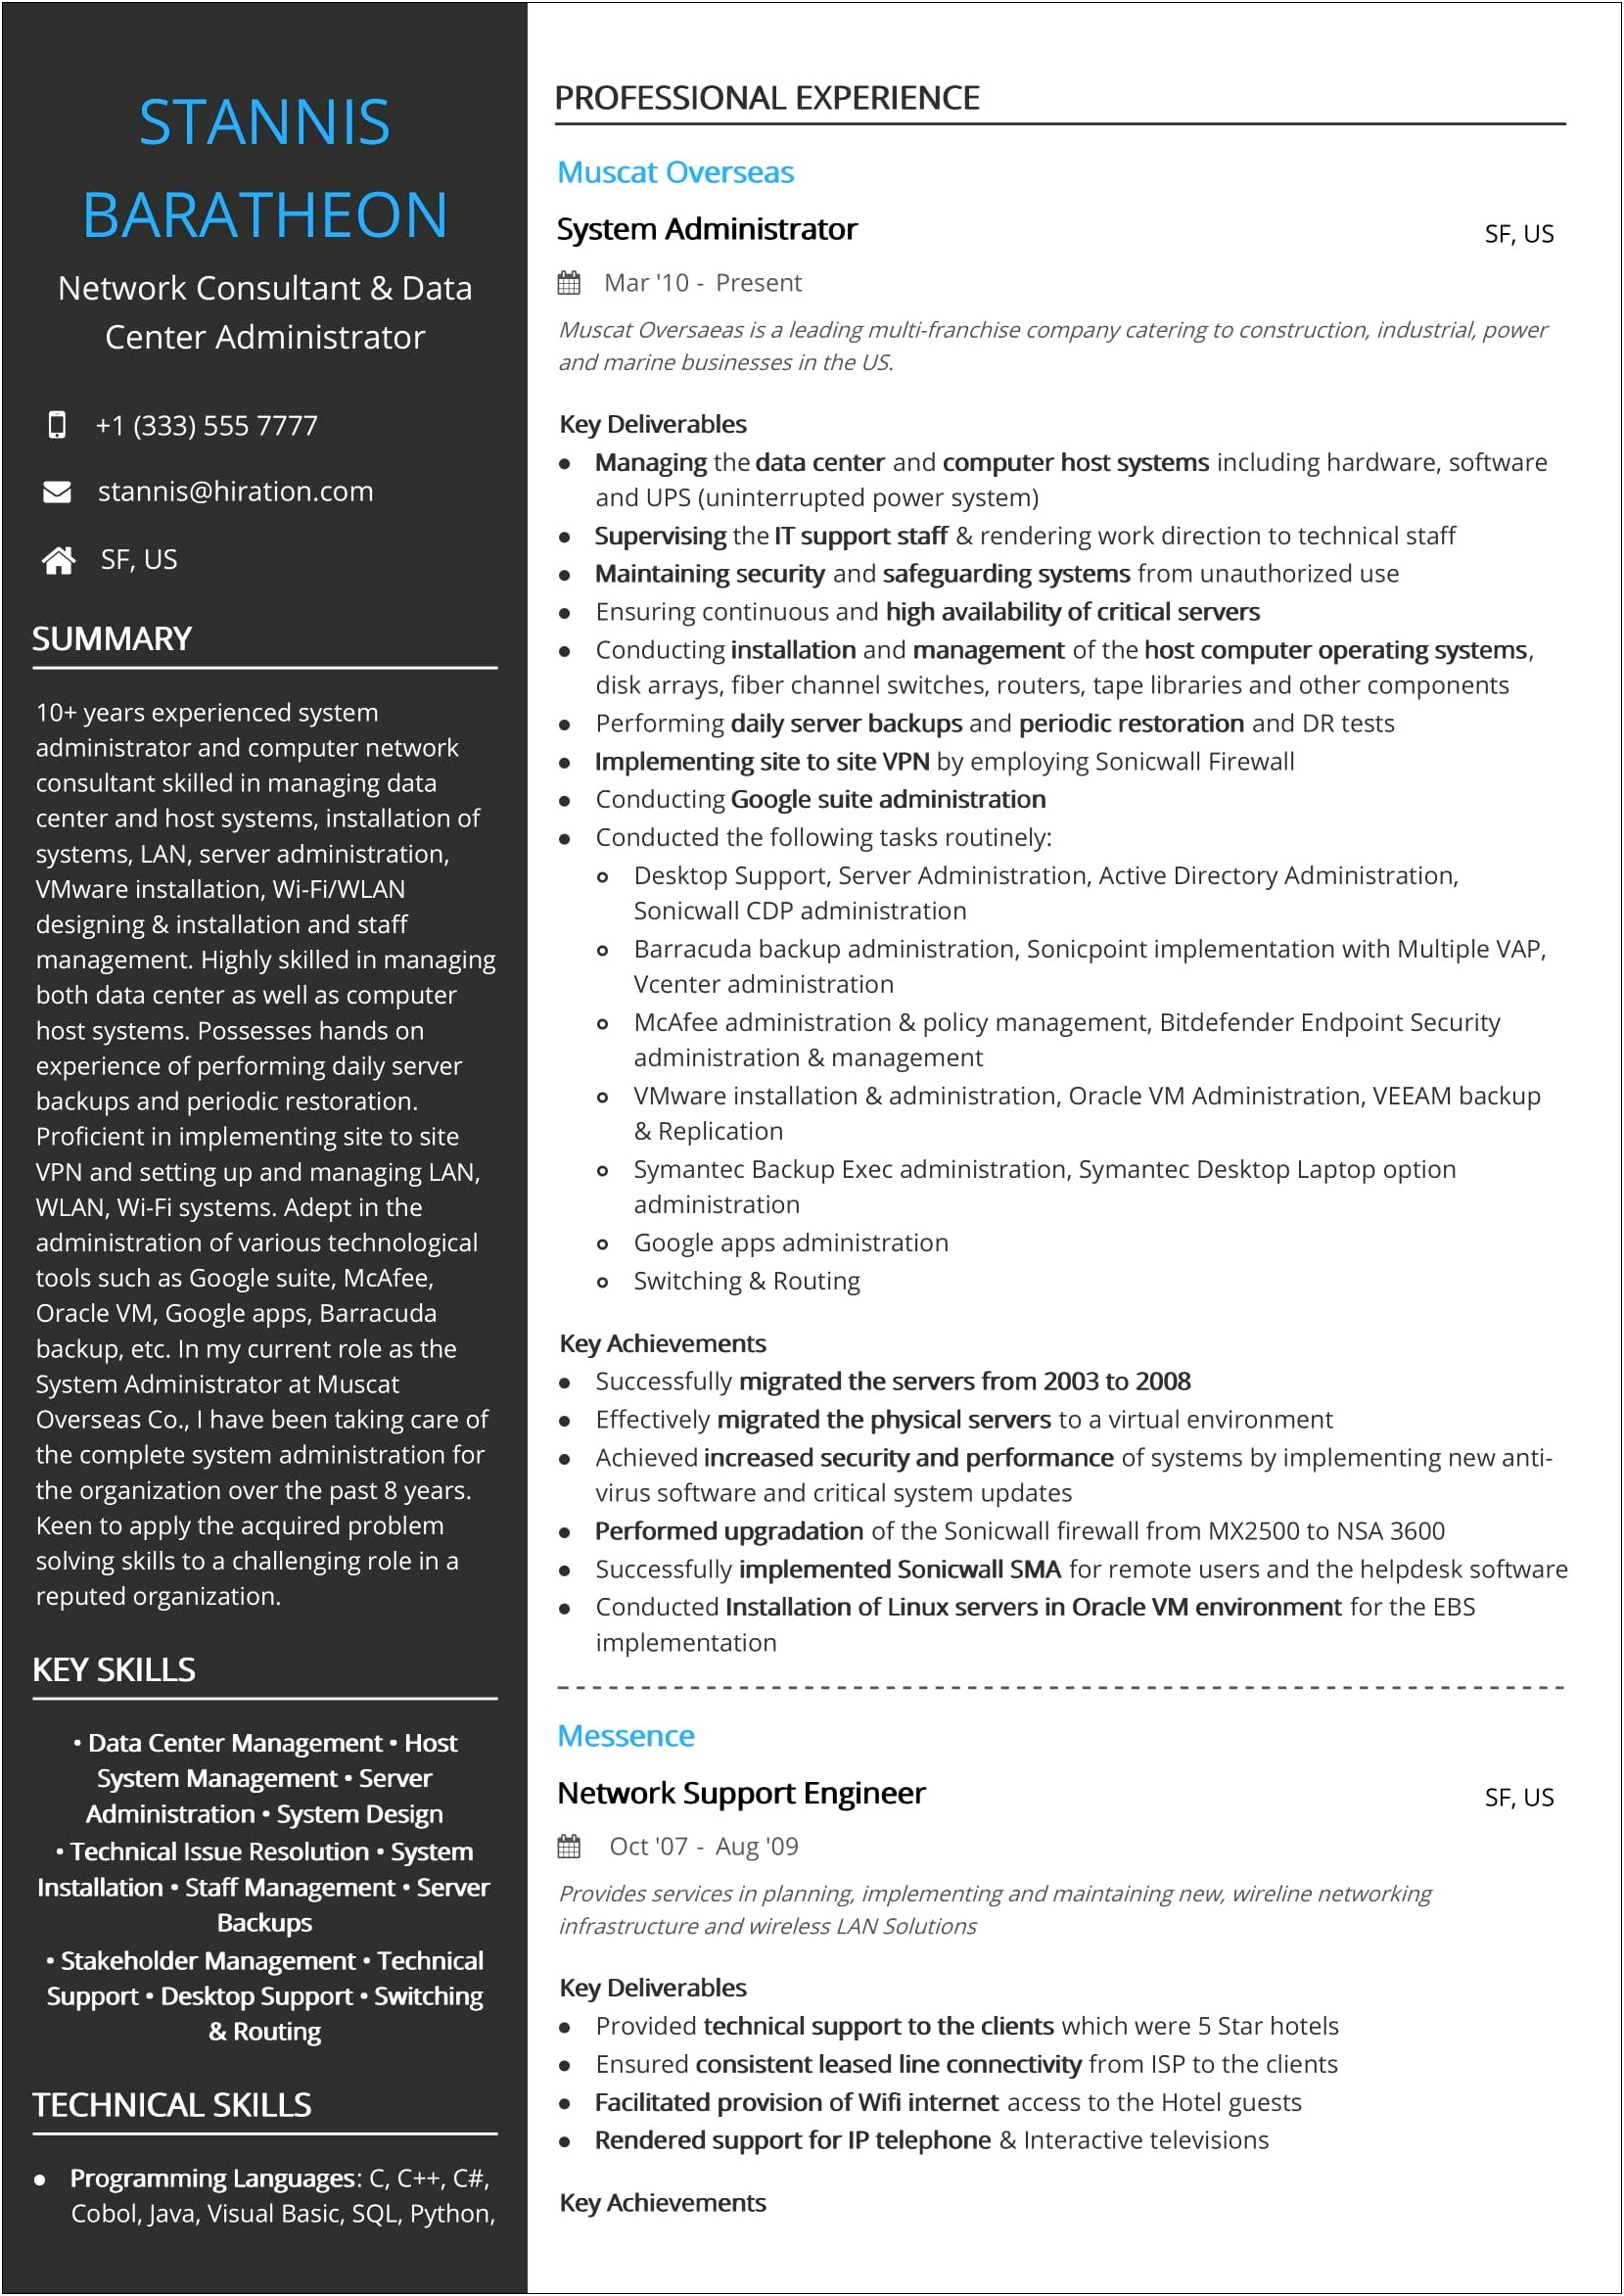 Sample Resume For Experienced Technical Support Engineer